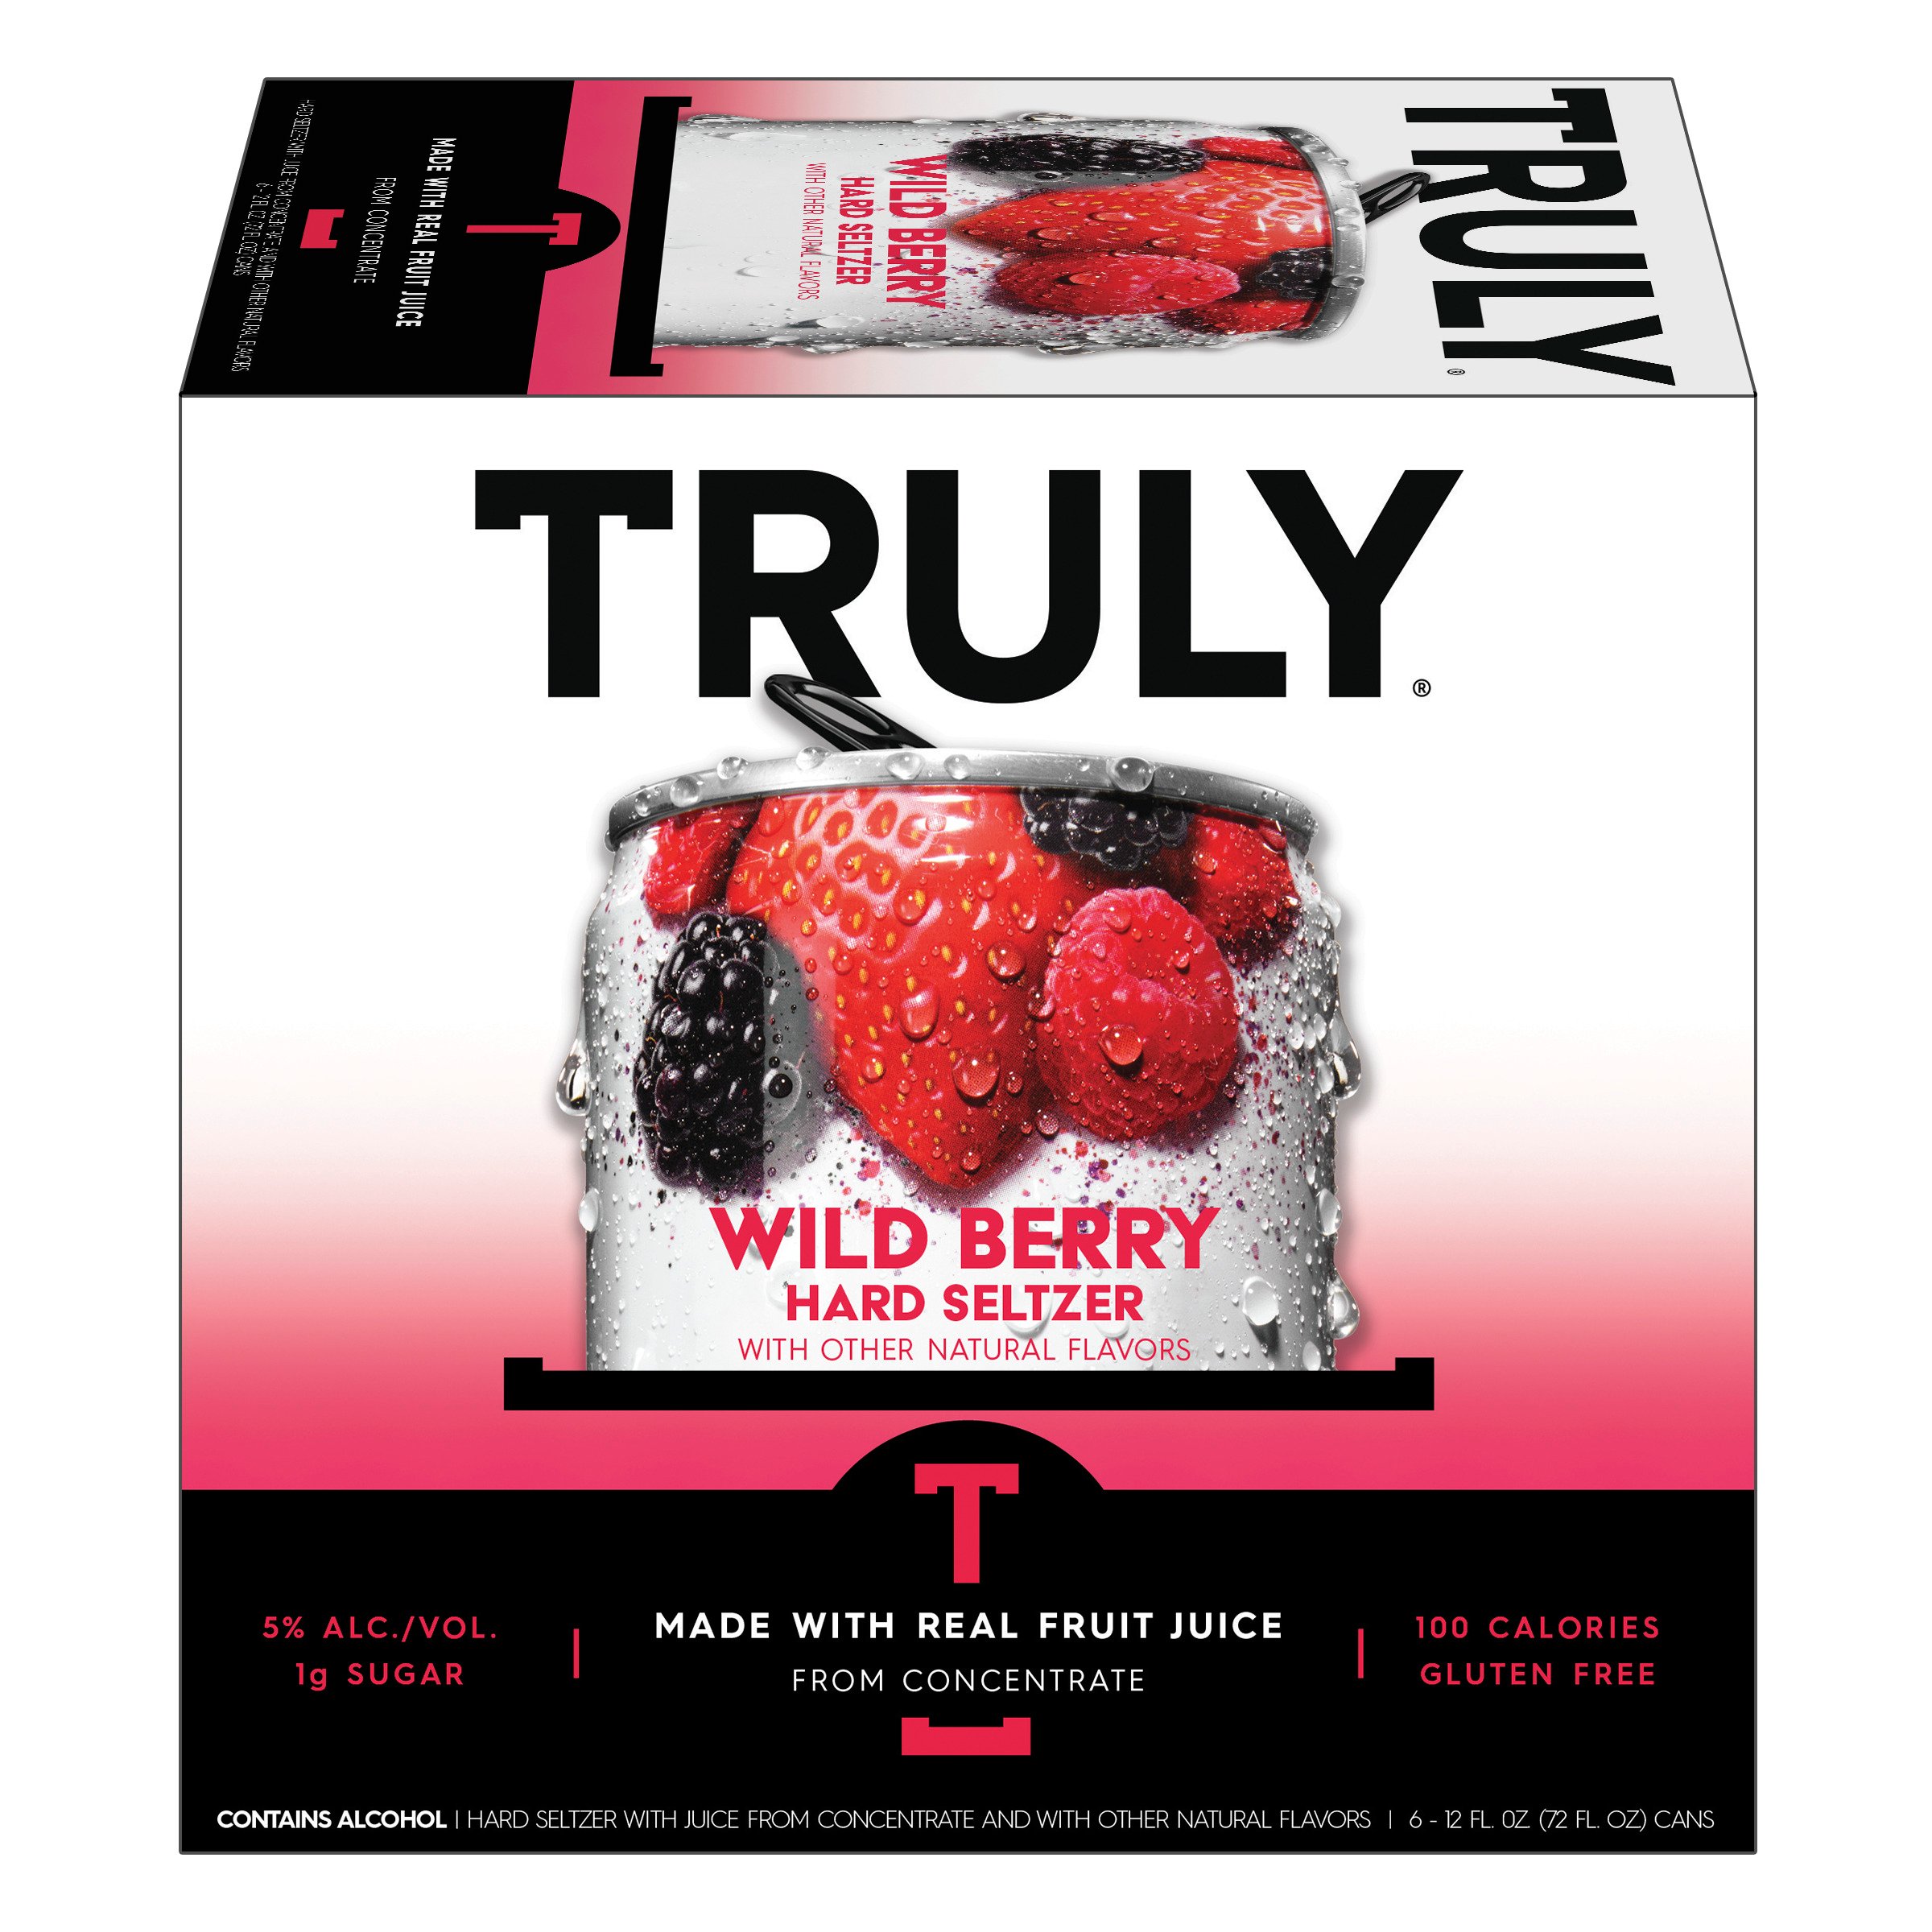 Truly Wild Berry Hard Seltzer 6 Pk Cans Shop Malt Beverages And Coolers At H E B